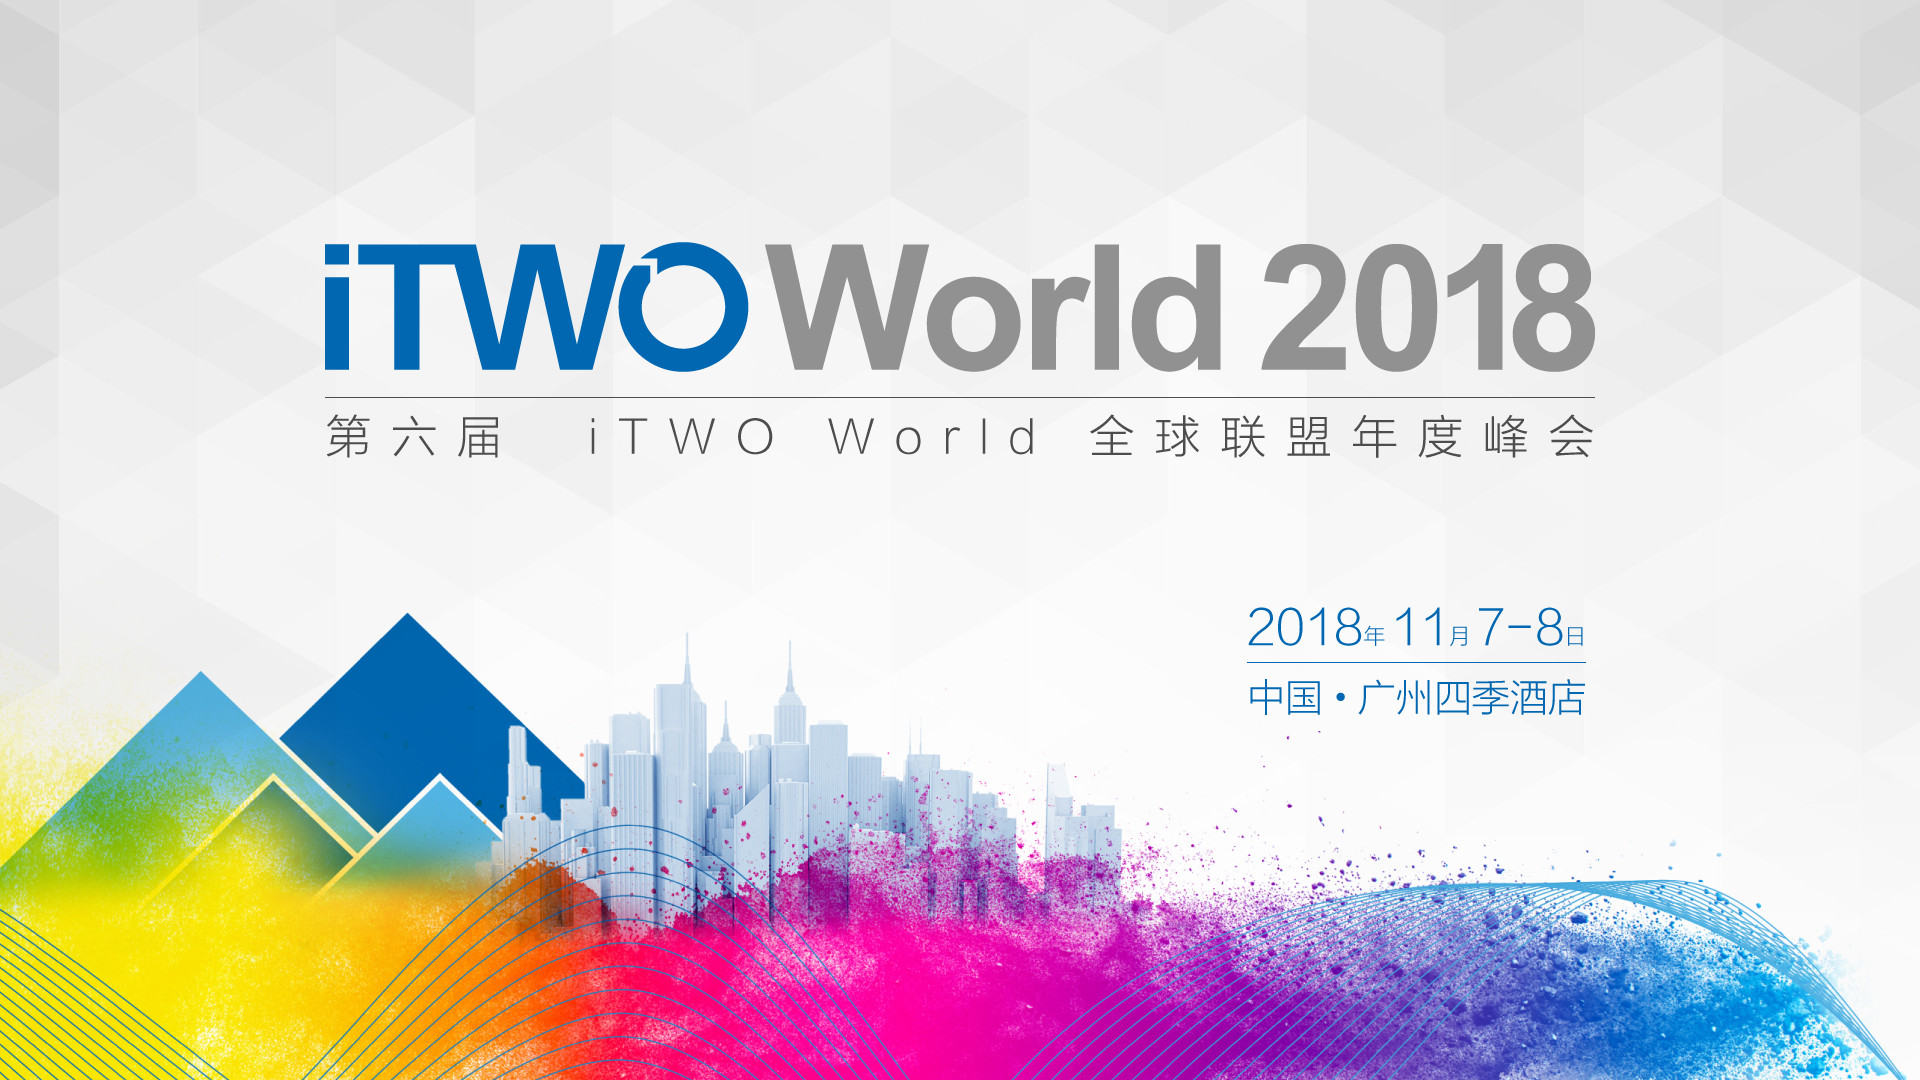 iTWO World 2018 全球峰会